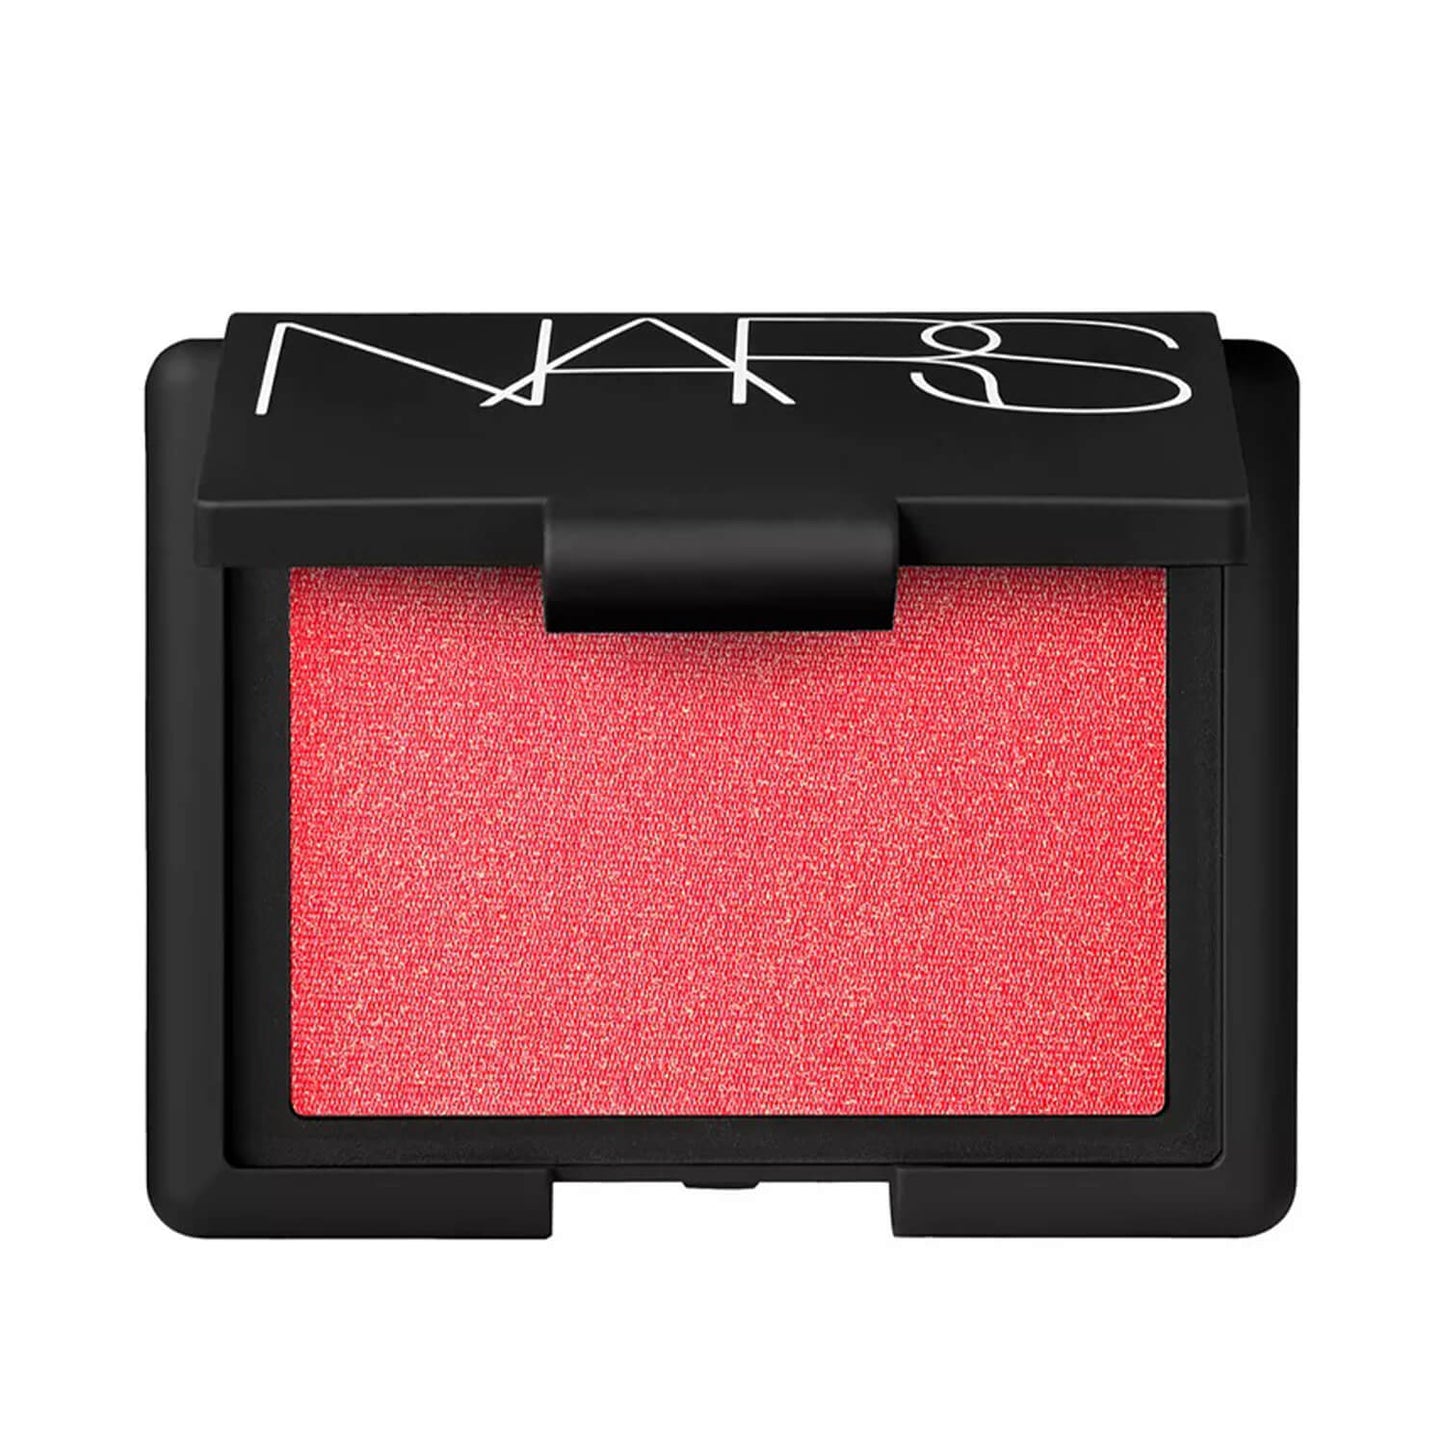 Shop 100% original NARS blush in Orgasm X shade available at Heygirl.pk for delivery in Pakistan. 